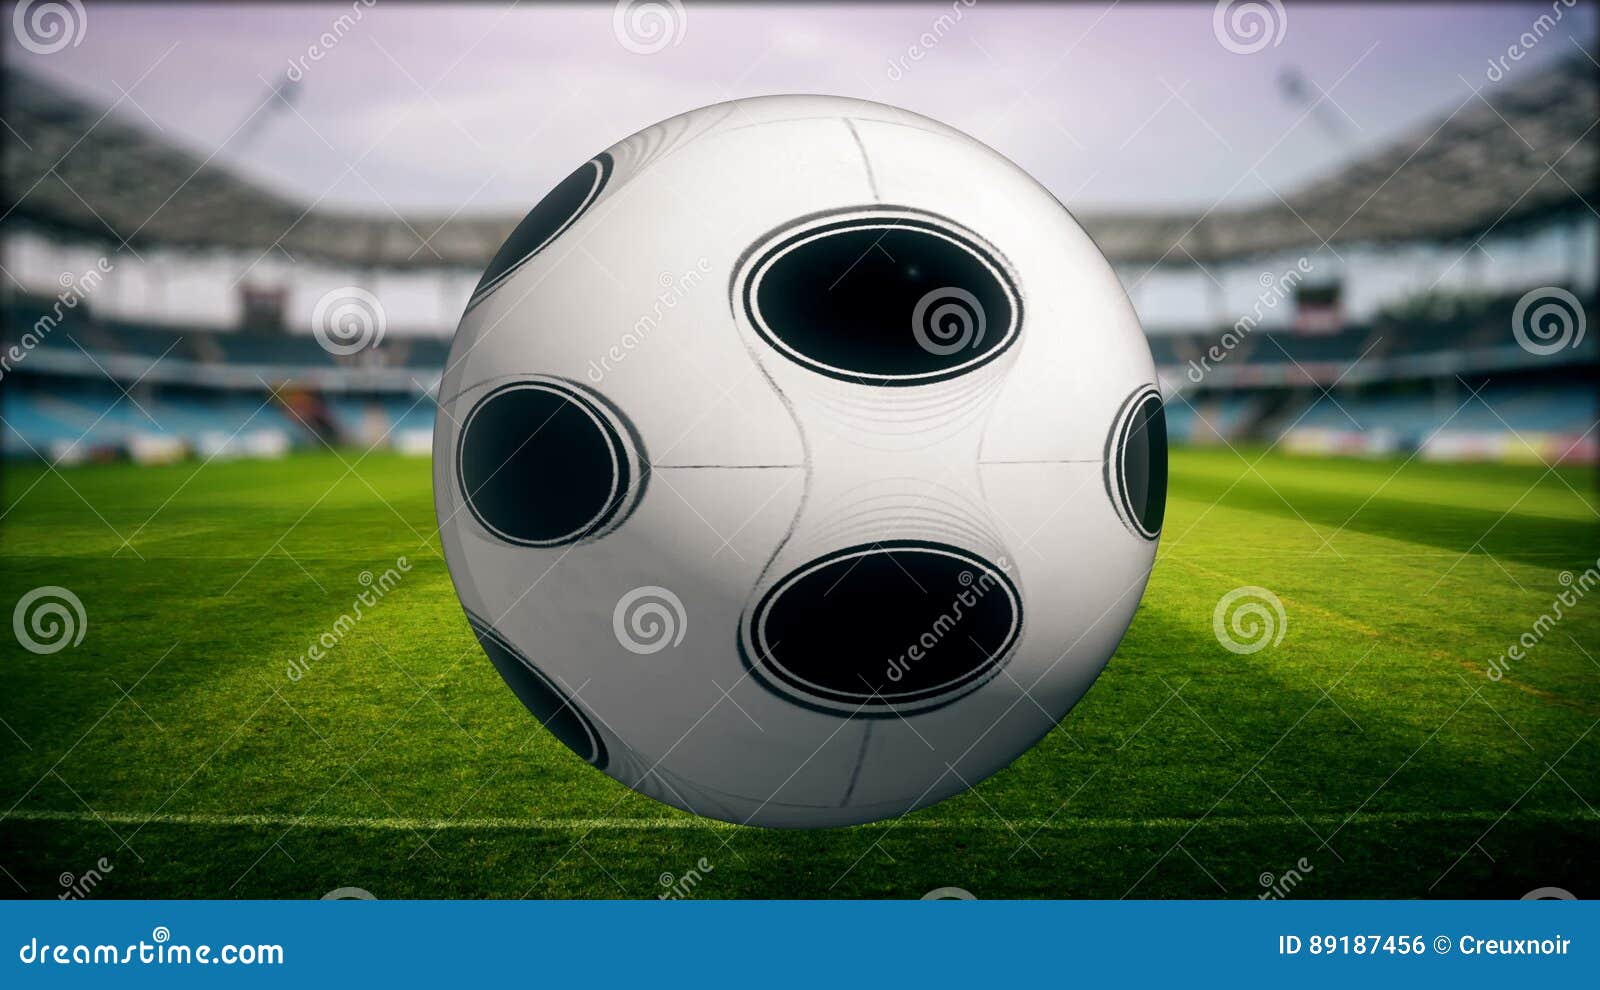 Soccer Player Kicking Ball in Stadium - TV Show Intro Stock Footage